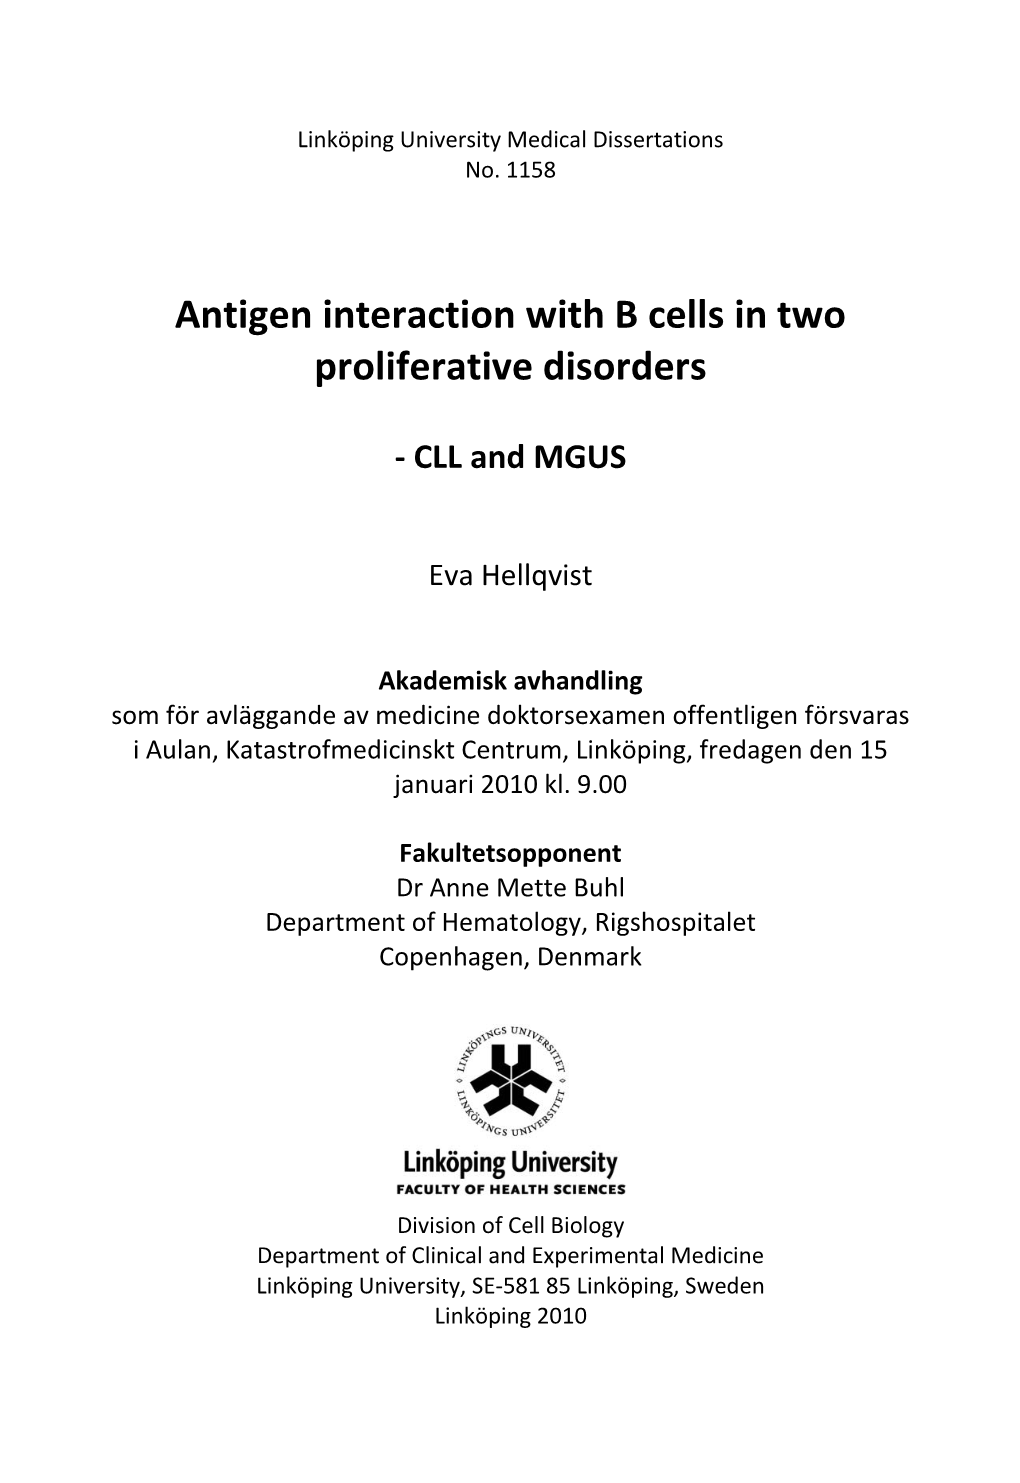 Antigen Interaction with B Cells in Two Proliferative Disorders